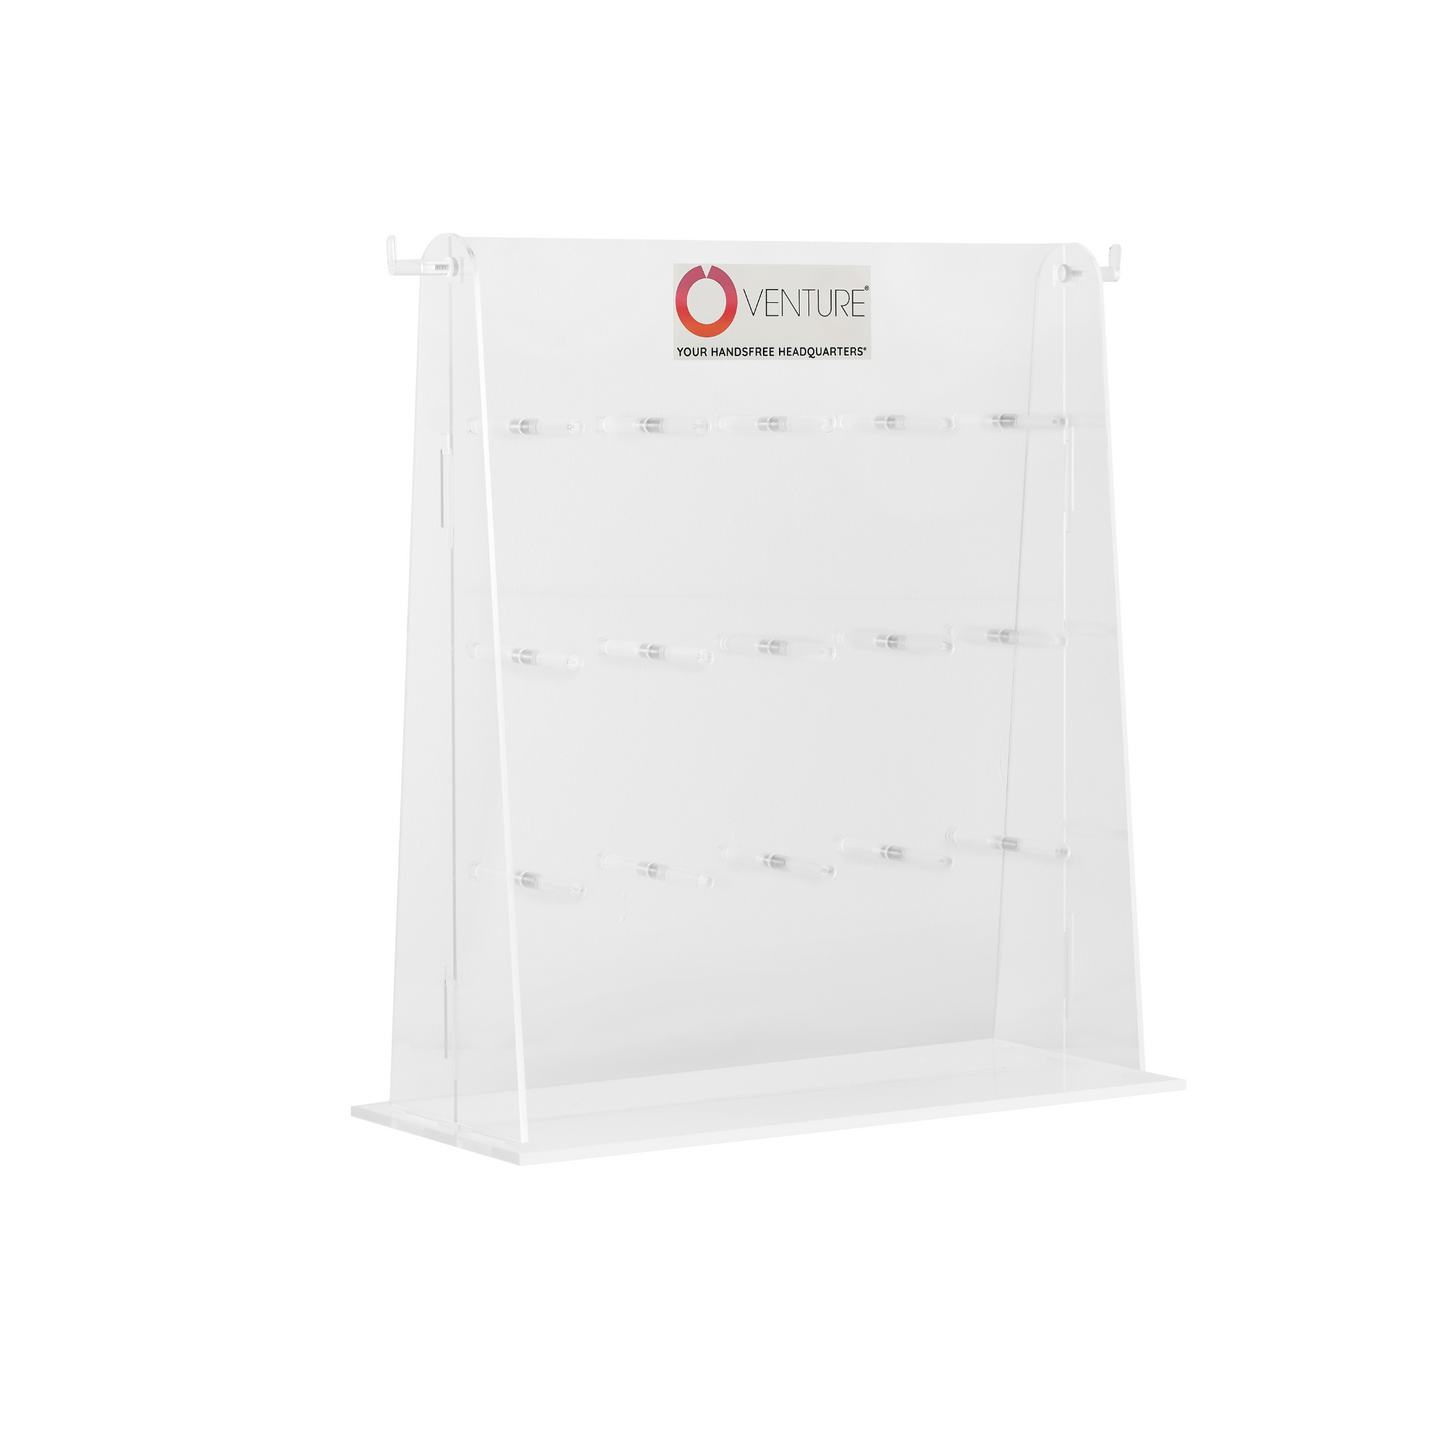 Oventure acrylic display peg board. 15 pegs on each side and 2 hooks to hang product